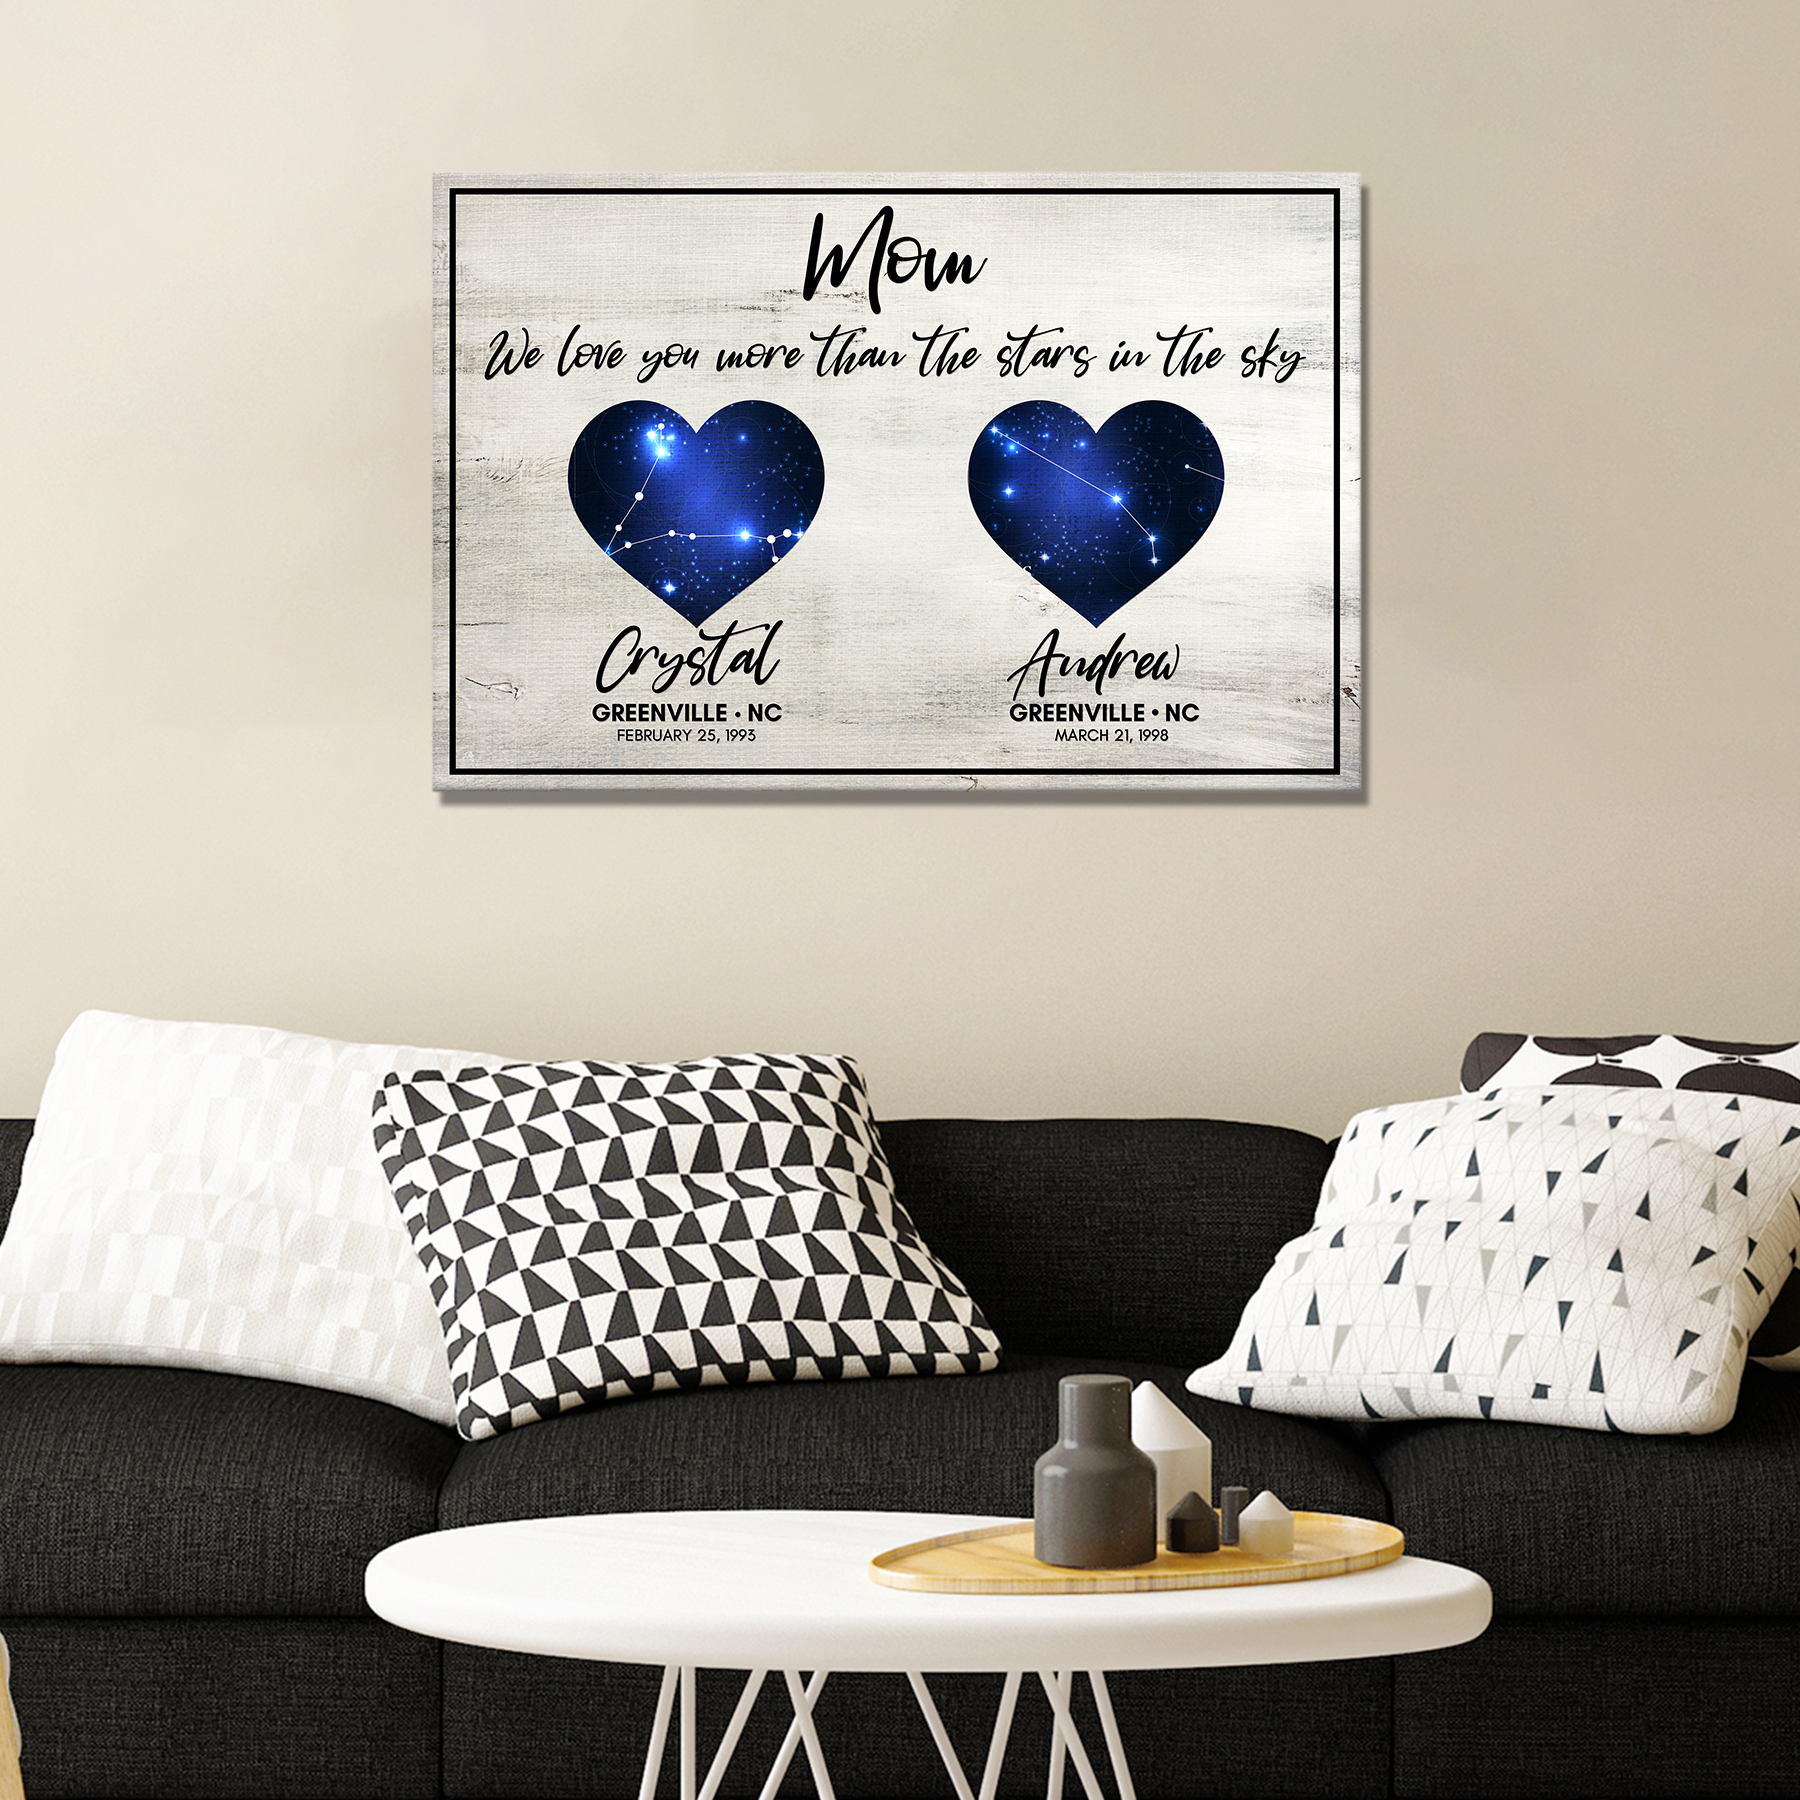 We Love You More Than the Stars in the Sky Sign Style 1 - Image by Tailored Canvases